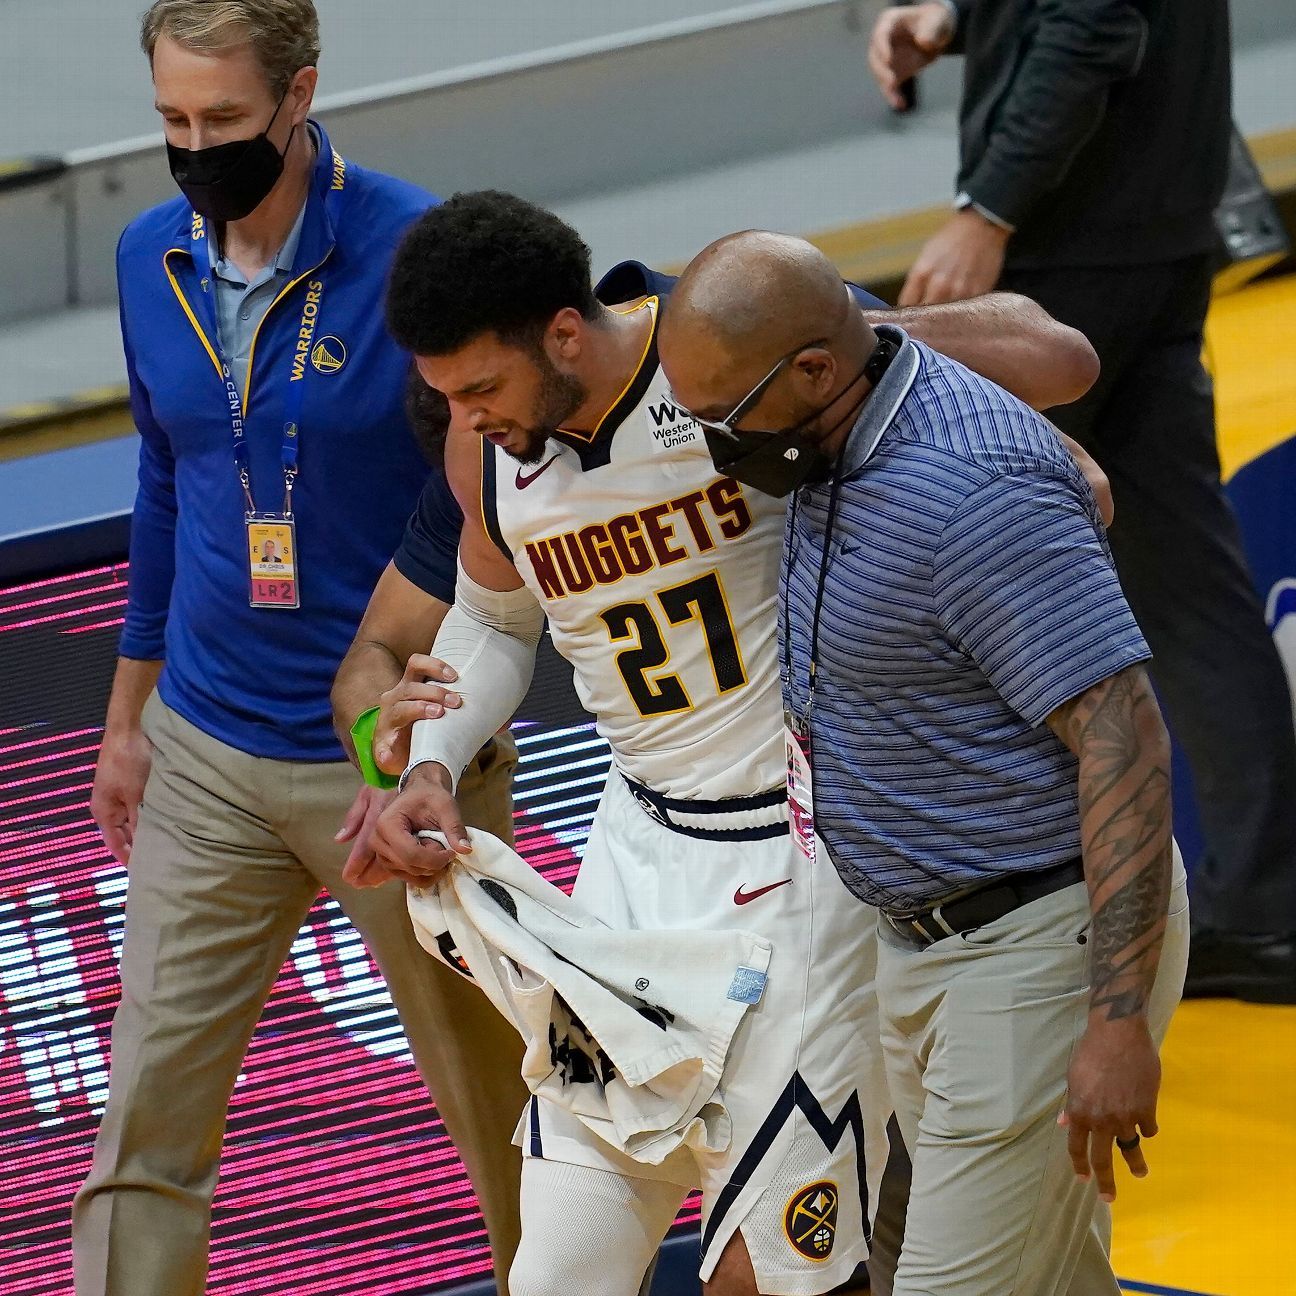 Nuggets star Jamal Murray was “devastated” after ACL injury at the end of the season, says Michael Malone